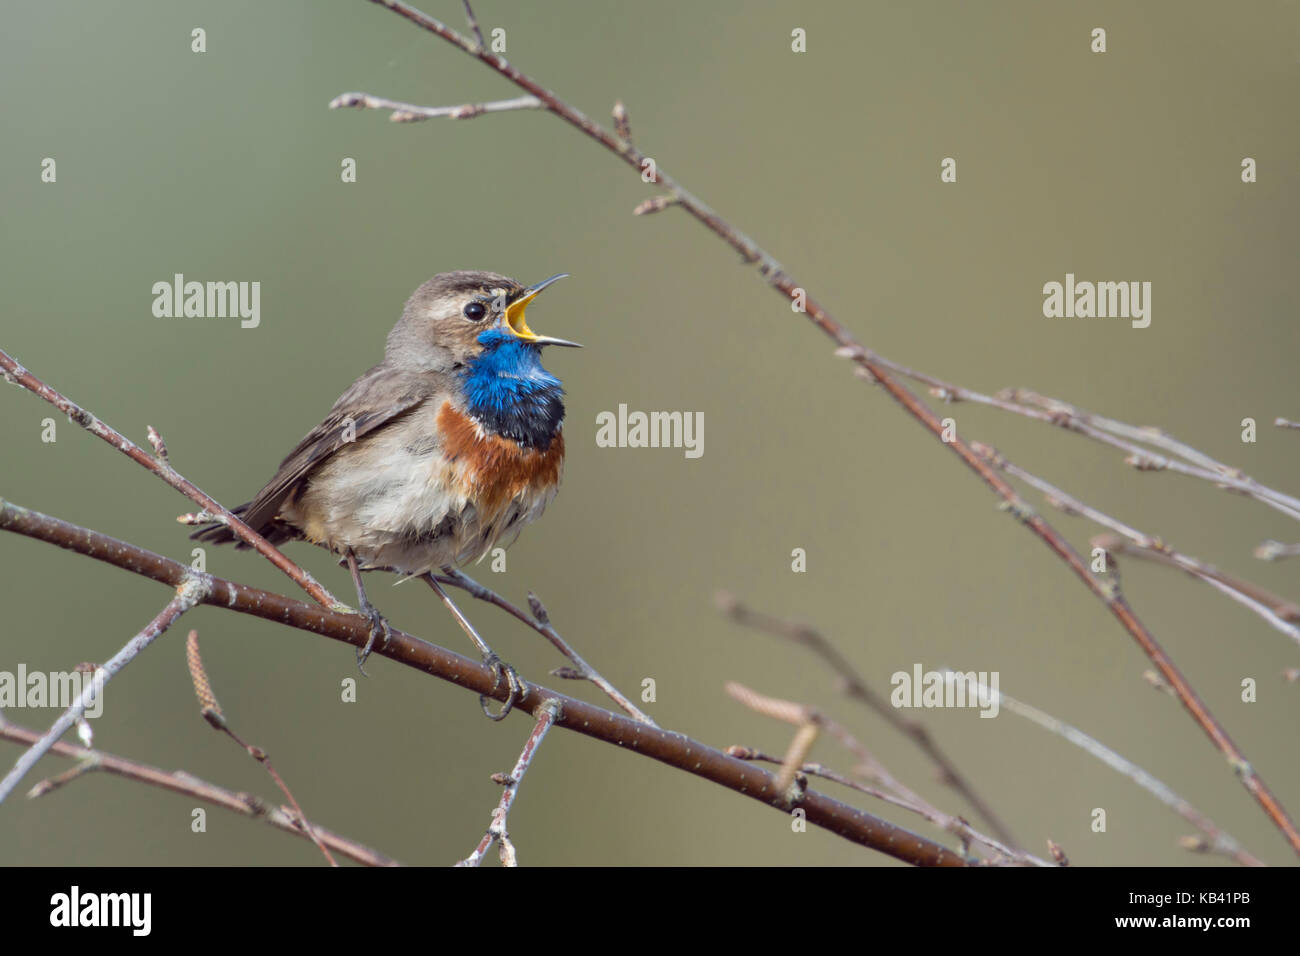 White-spotted Bluethroat / Blaukehlchen ( Luscinia svecica ) singing its song, sitting in dry branches of a birch bush, wildlife, Europe. Stock Photo